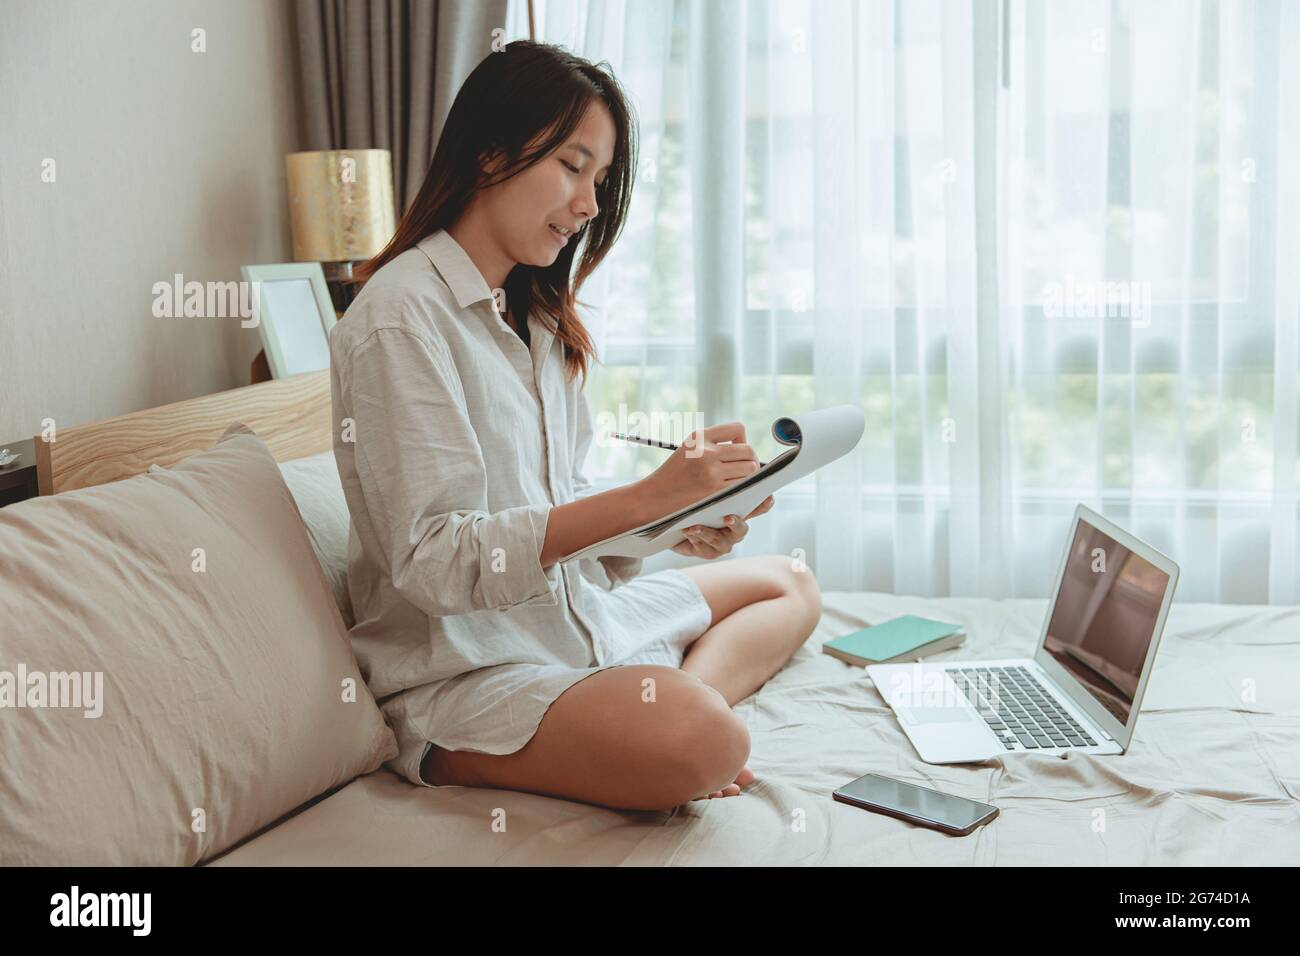 Girl teen working study at home during covid lockdown self quarantine, women comfortable holiday writing homework on the bed. Stock Photo